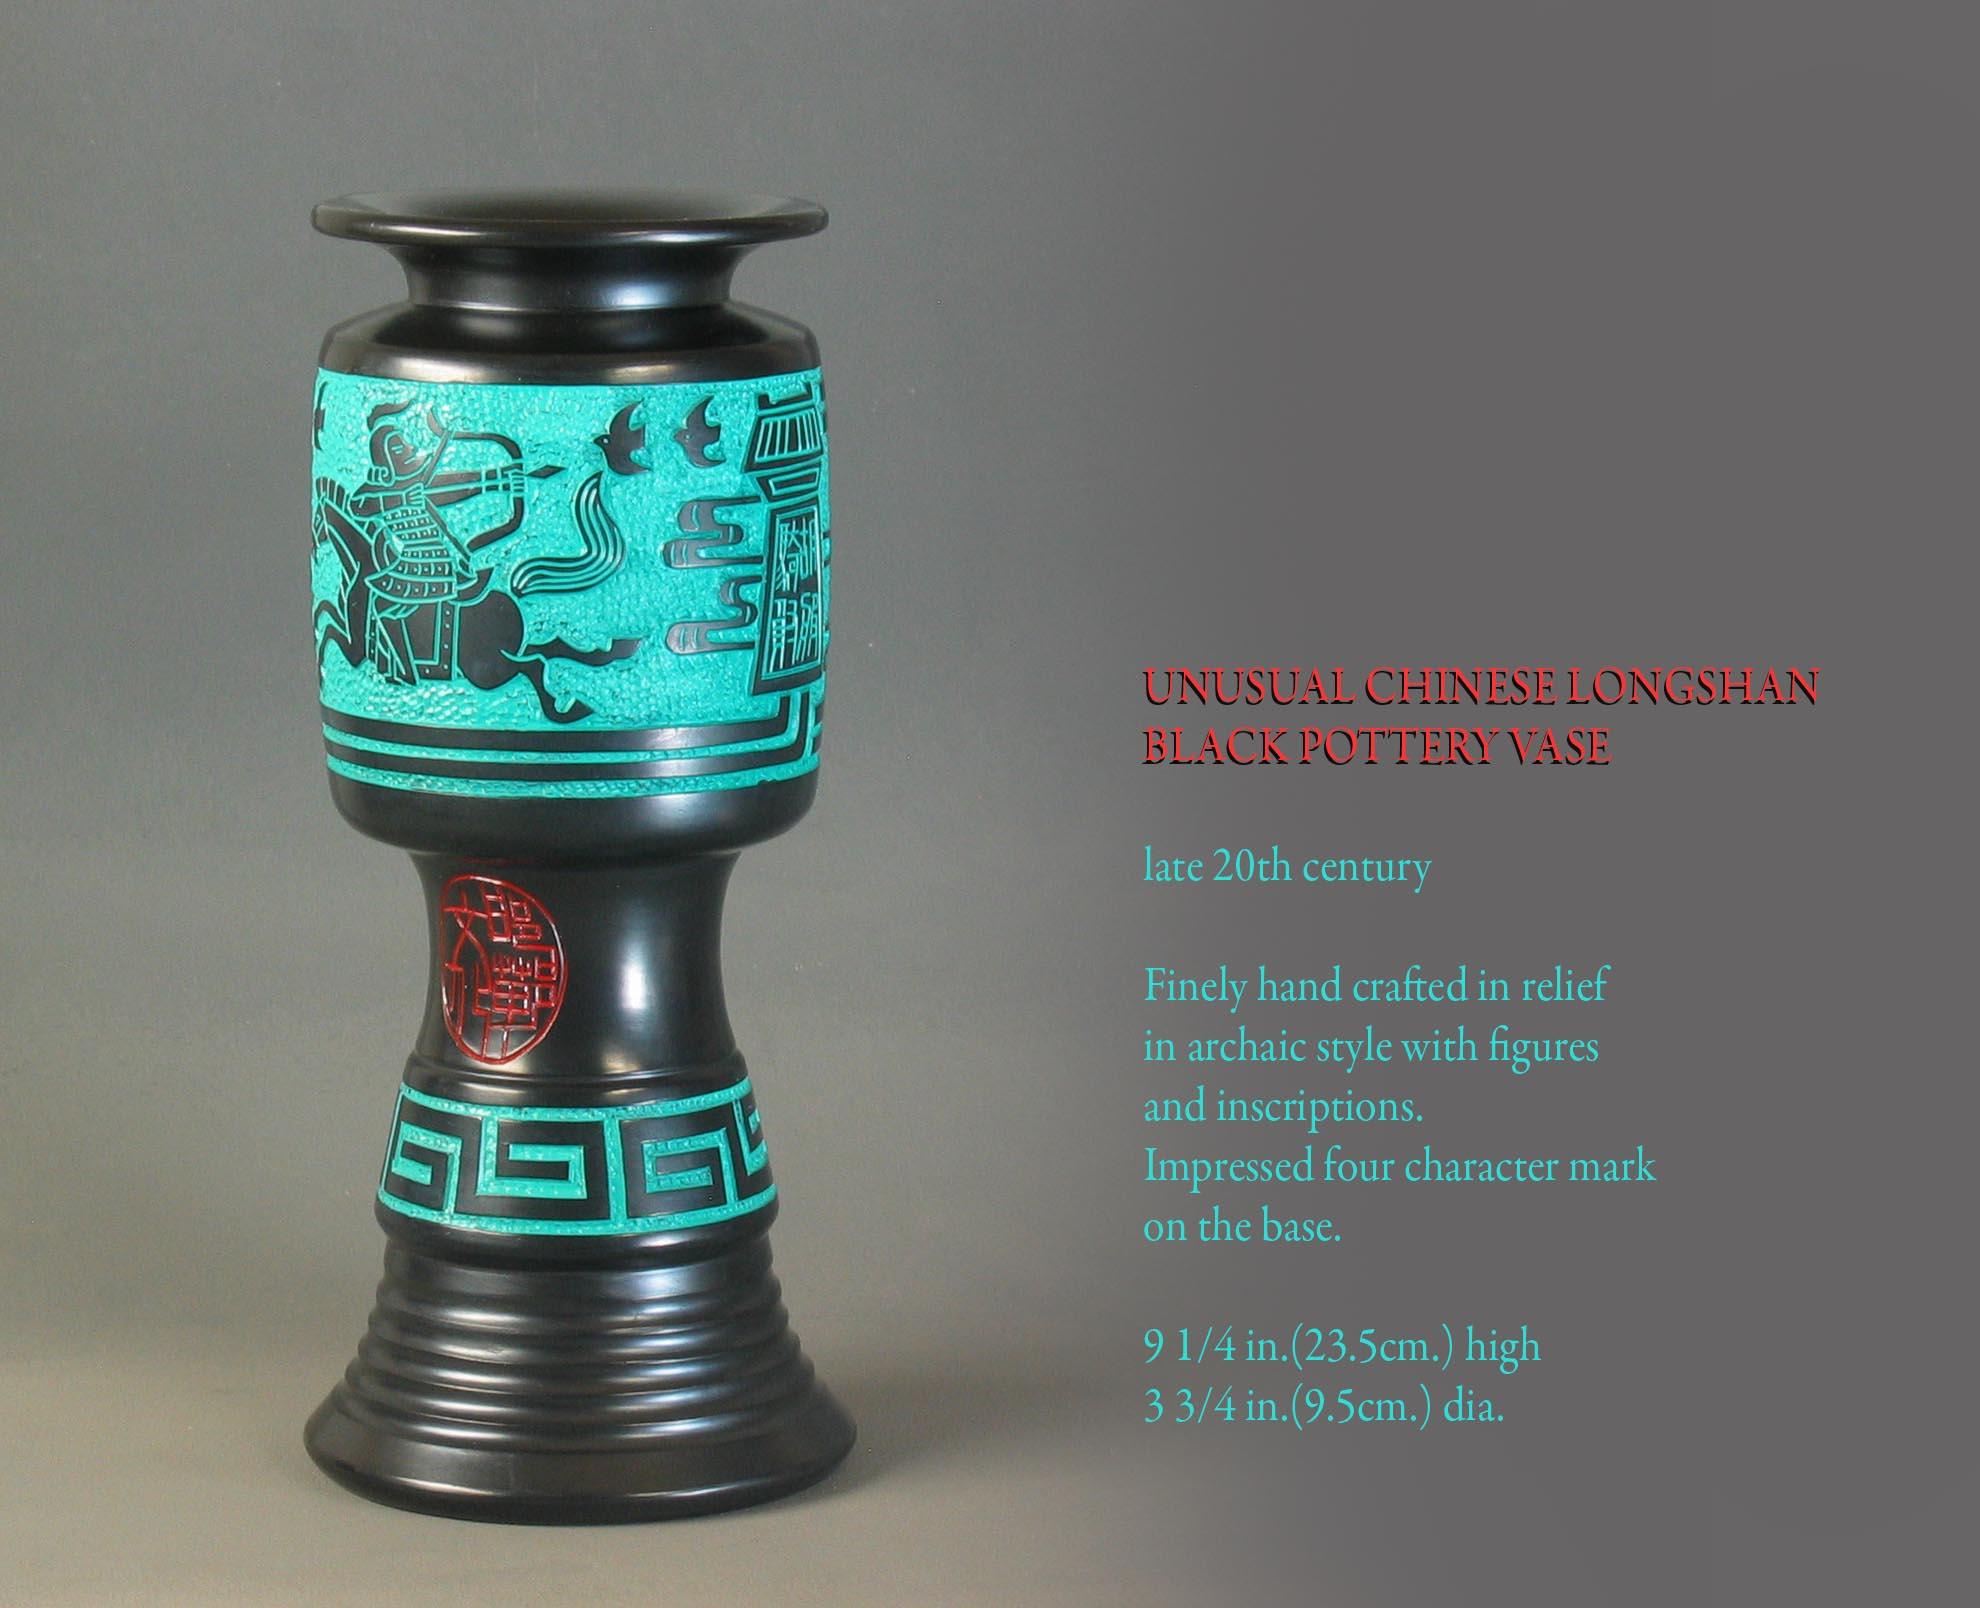 Unusual Chinese Longshan
Black pottery vase

Late 20th century.

Finely handcrafted in relief
in archaic style with figures 
and inscriptions.
Impressed four character mark 
on the base.

Measures: 9 1/4 in.(23.5cm.) high.
3 3/4 in.